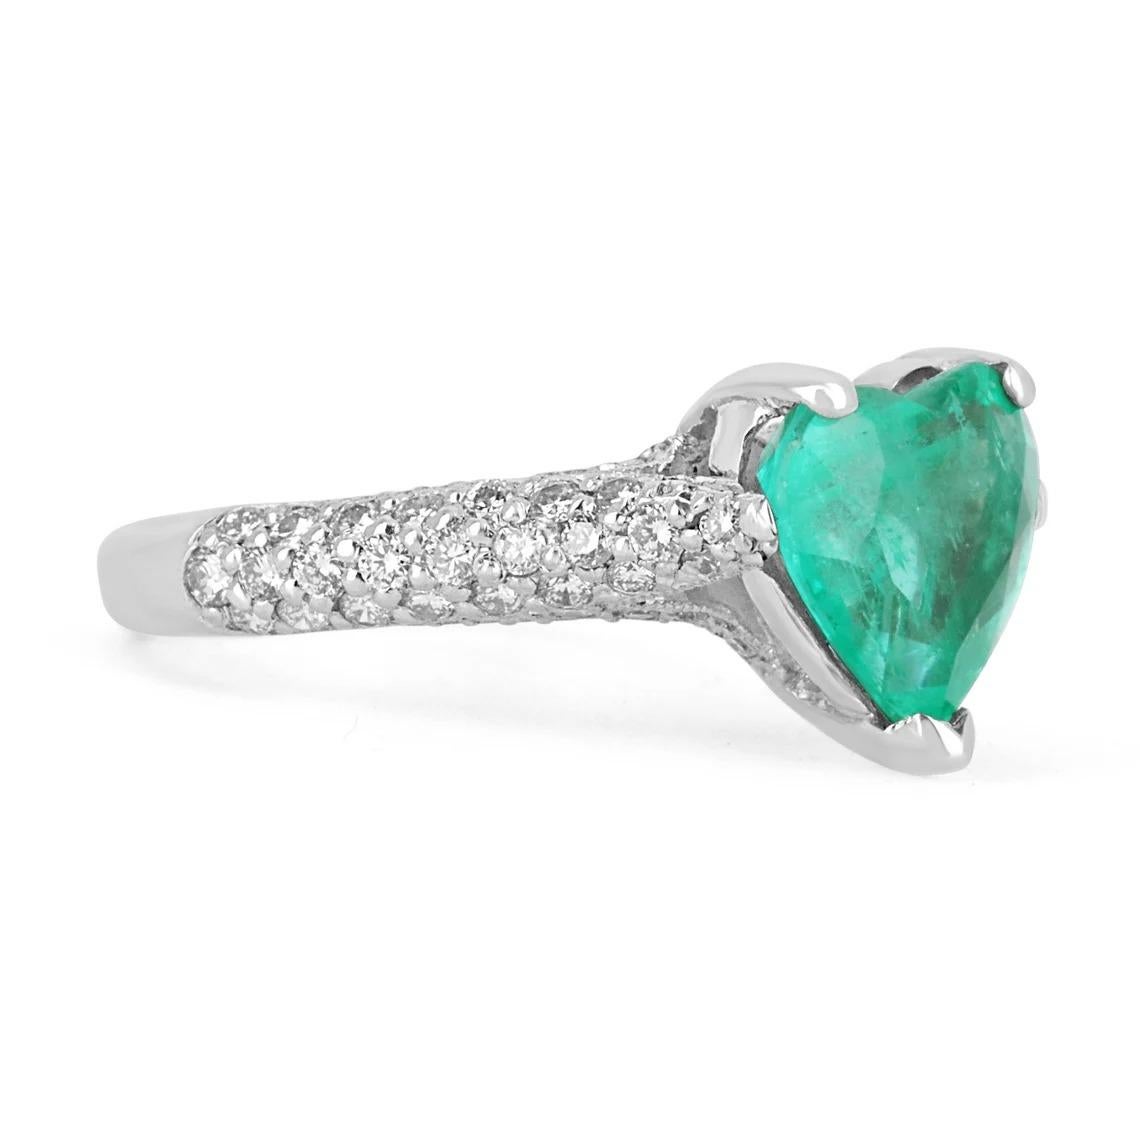 A fine, vivacious, 3.04tcw natural Colombian emerald heart & diamond ring set in platinum. The center gem is a rare cut gemstone that possesses numerous enticing qualities, of which are the following; a striking rich yellowish-green color that is